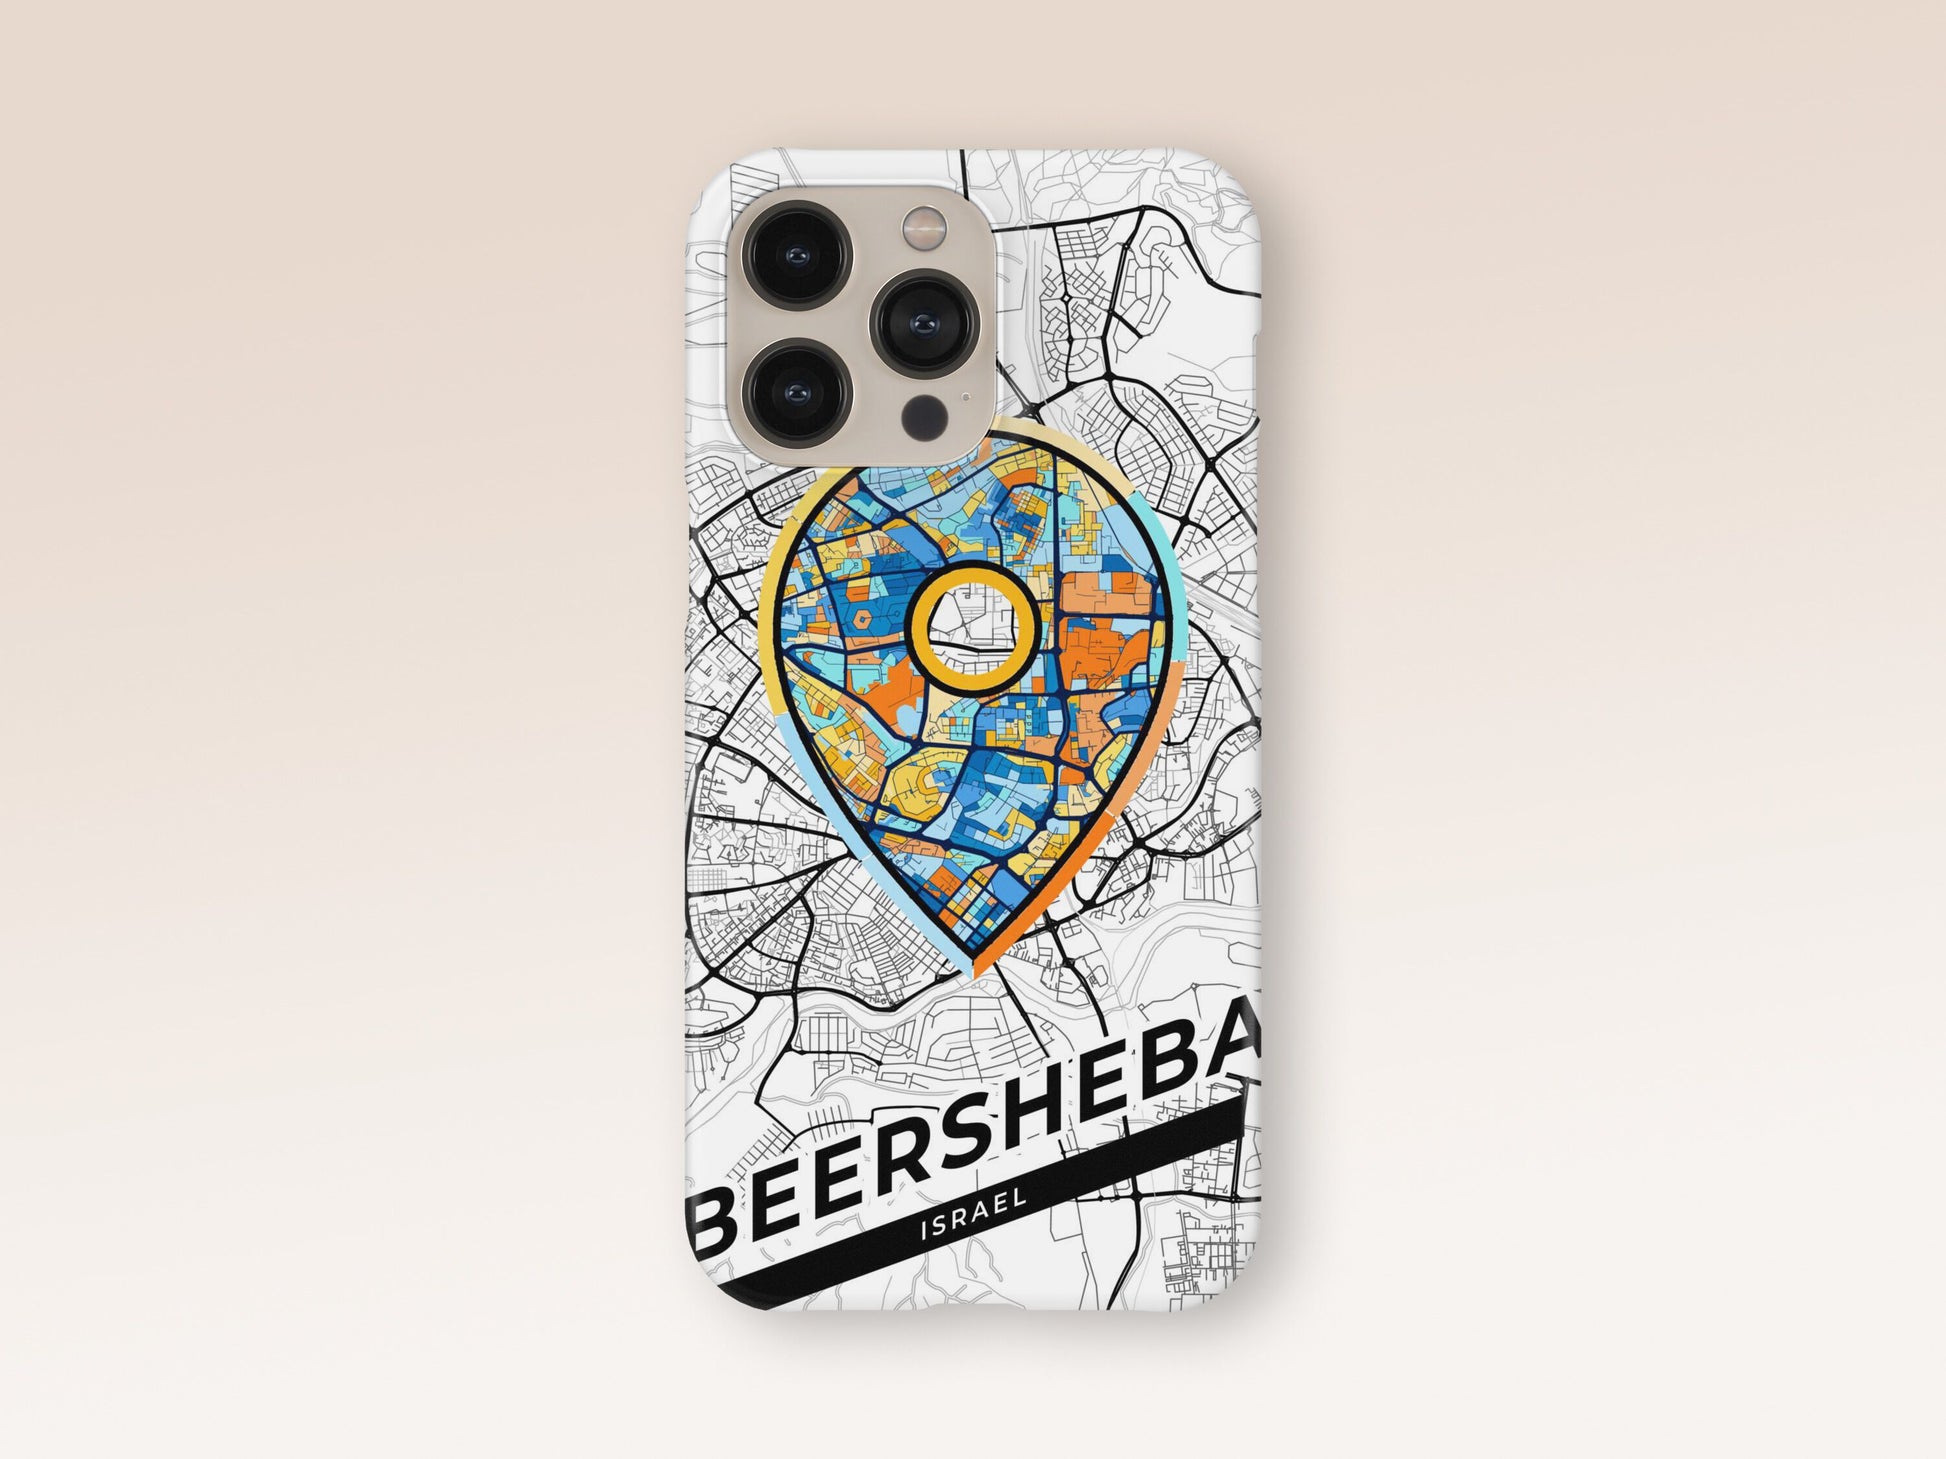 Beersheba Israel slim phone case with colorful icon. Birthday, wedding or housewarming gift. Couple match cases. 1